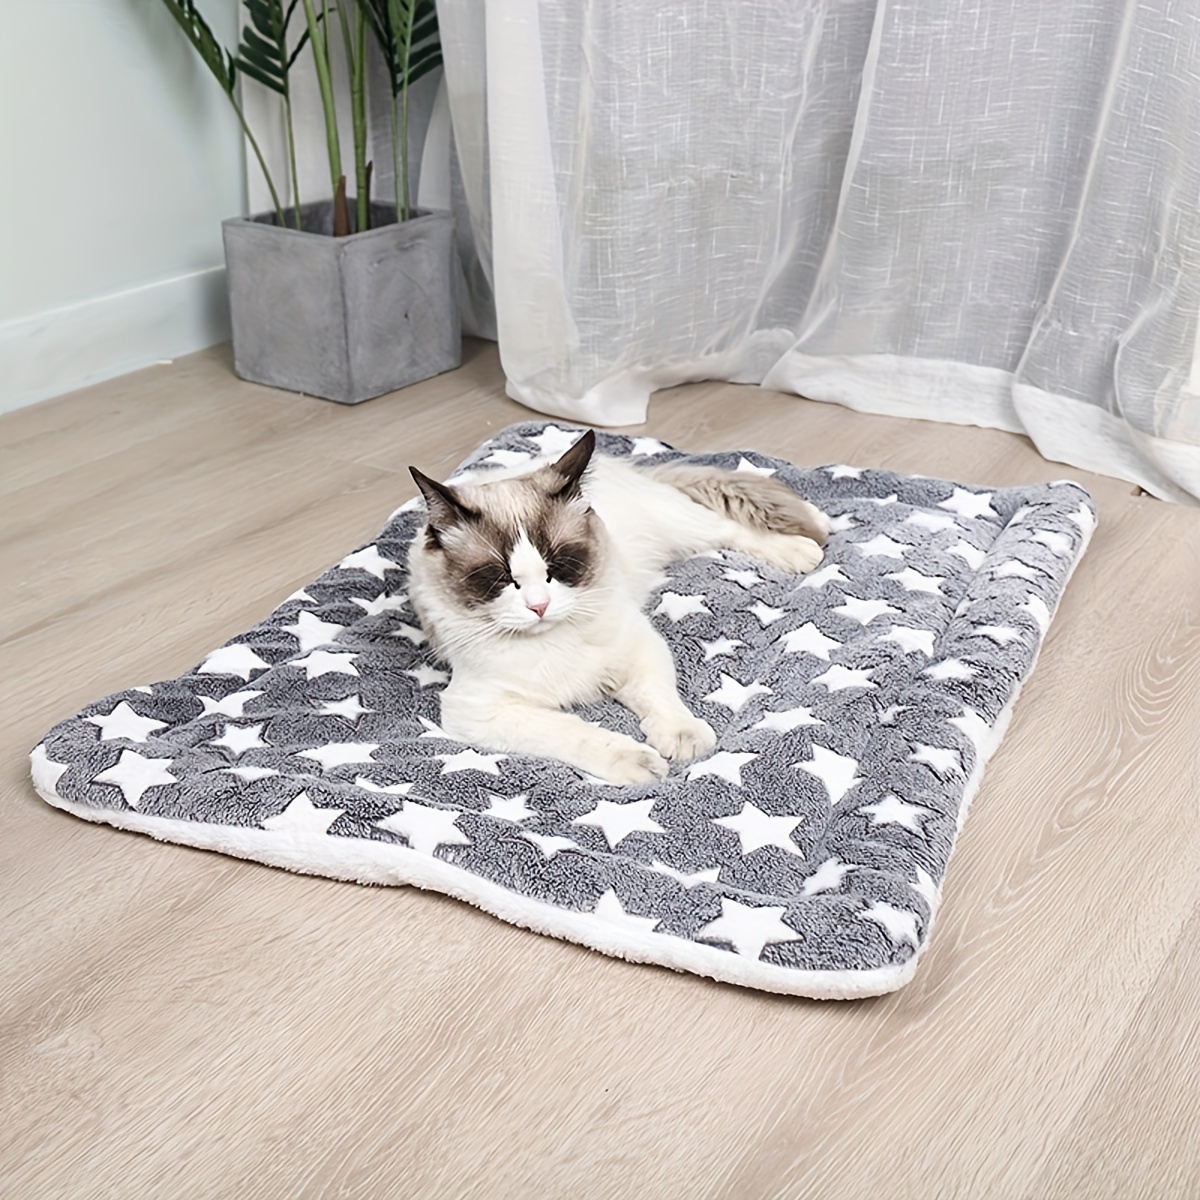 Mora Pets Ultra Soft Pet (Dog/Cat) Bed Mat with Cute Prints | Reversible Fleece Dog Crate Kennel Pad | Machine Washable Pet